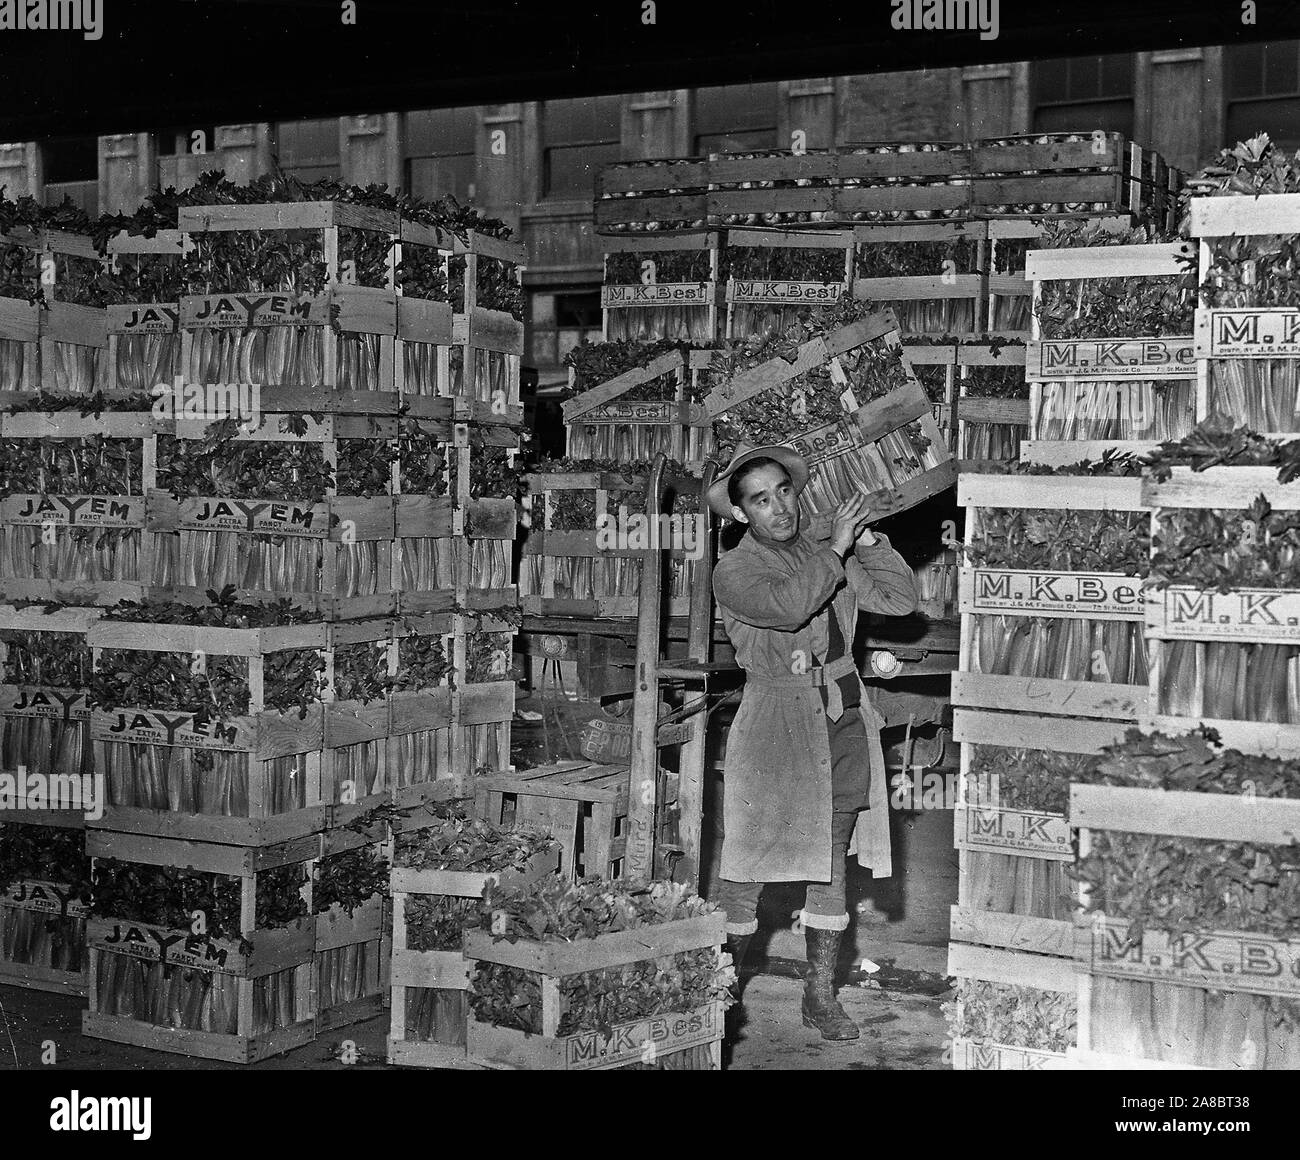 Los Angeles, California. Celery section of central produce market, Los Angeles operated almost exclusively, before evacuation, by residents of Japanese ancestry 4/11/1942 Stock Photo